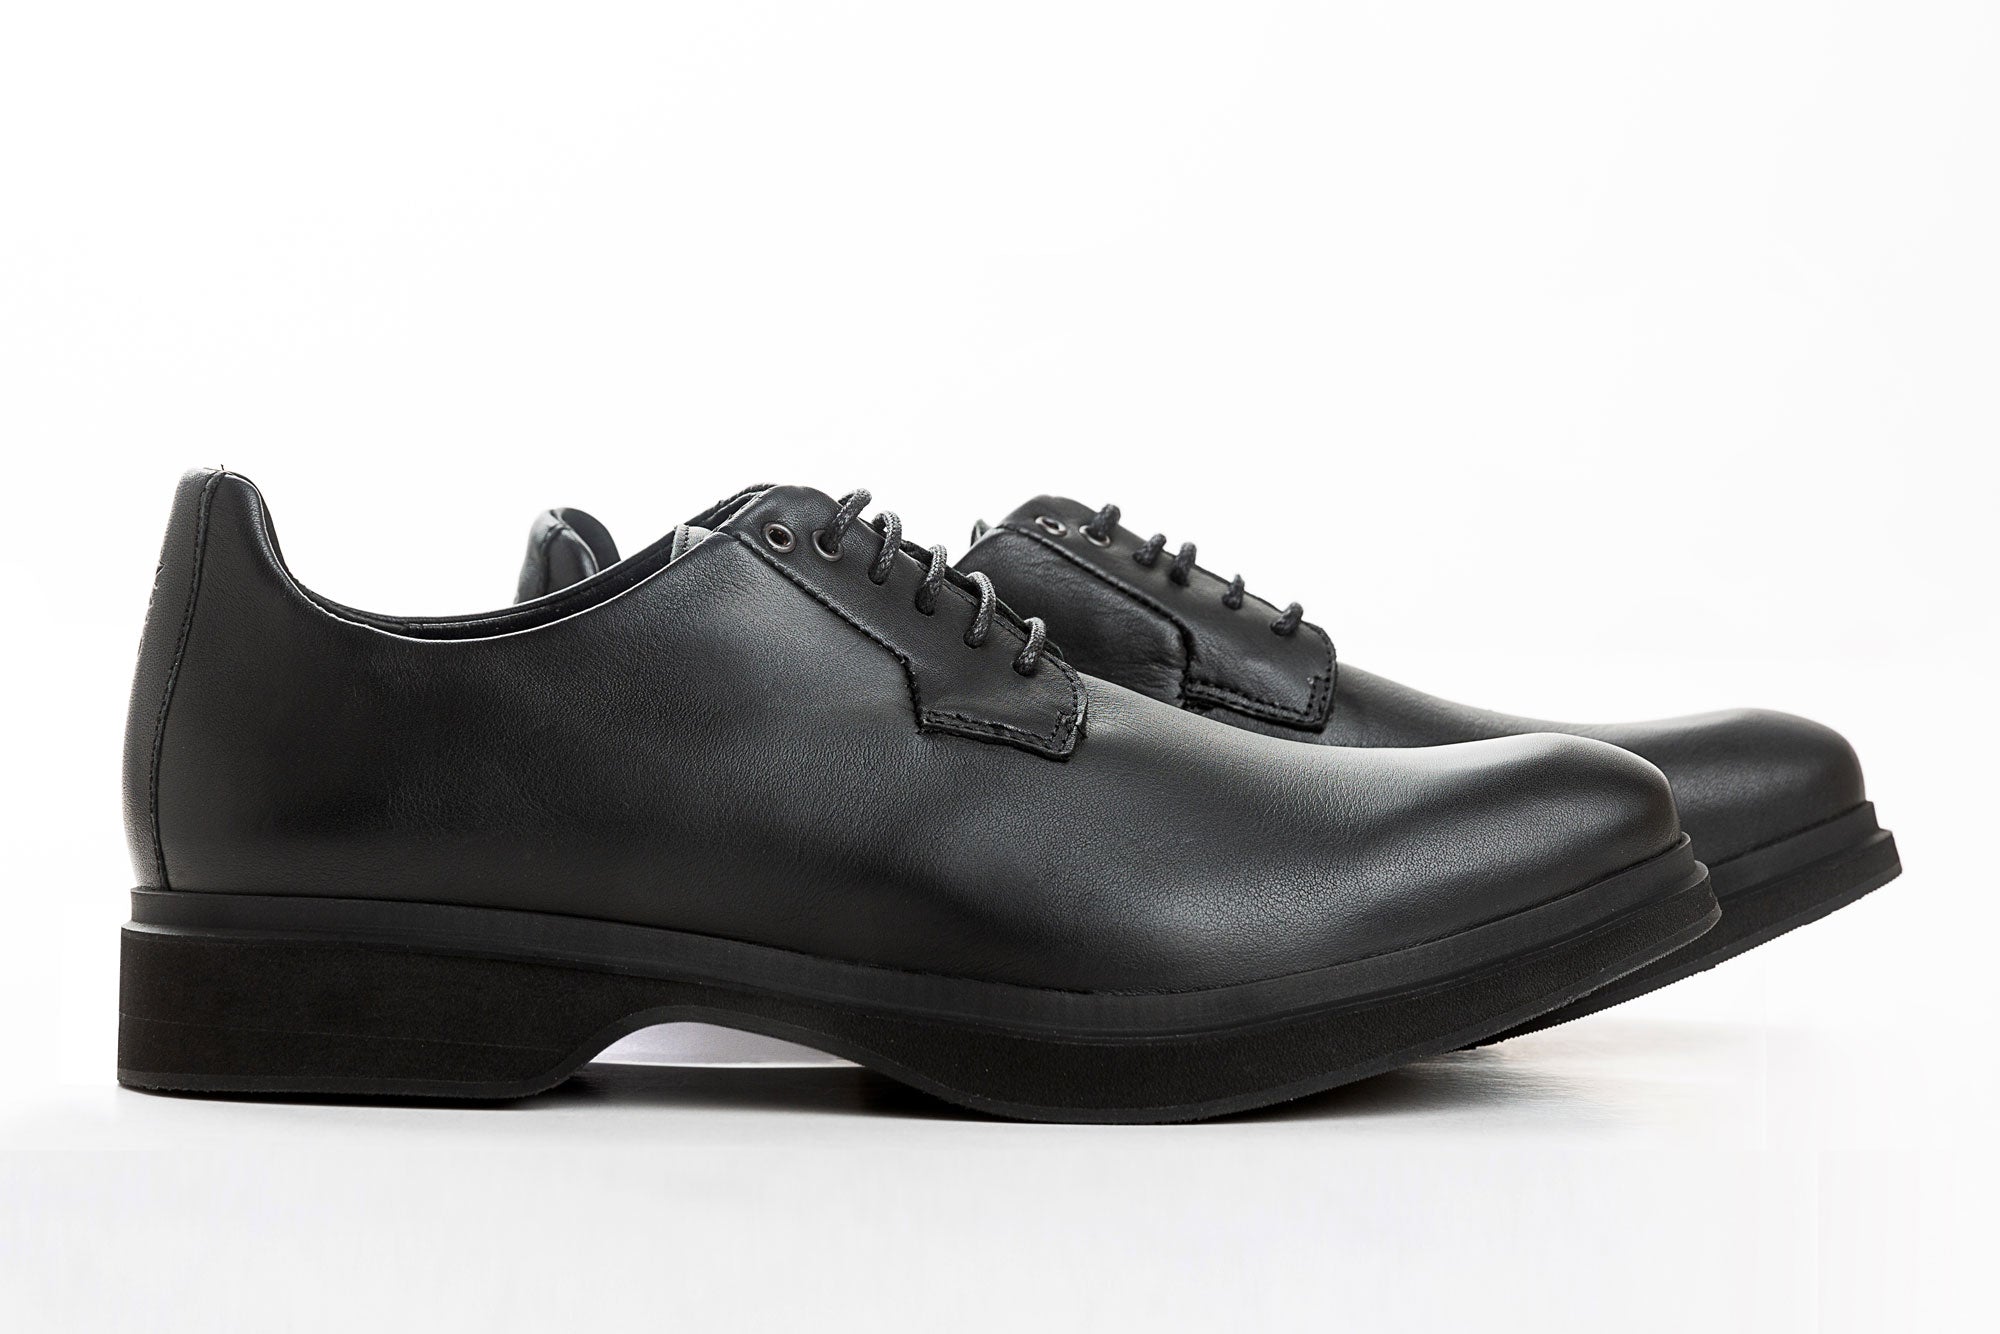 Most Comfortable Mens Dress Shoes For Walking, MARATOWN - MARATOWN®